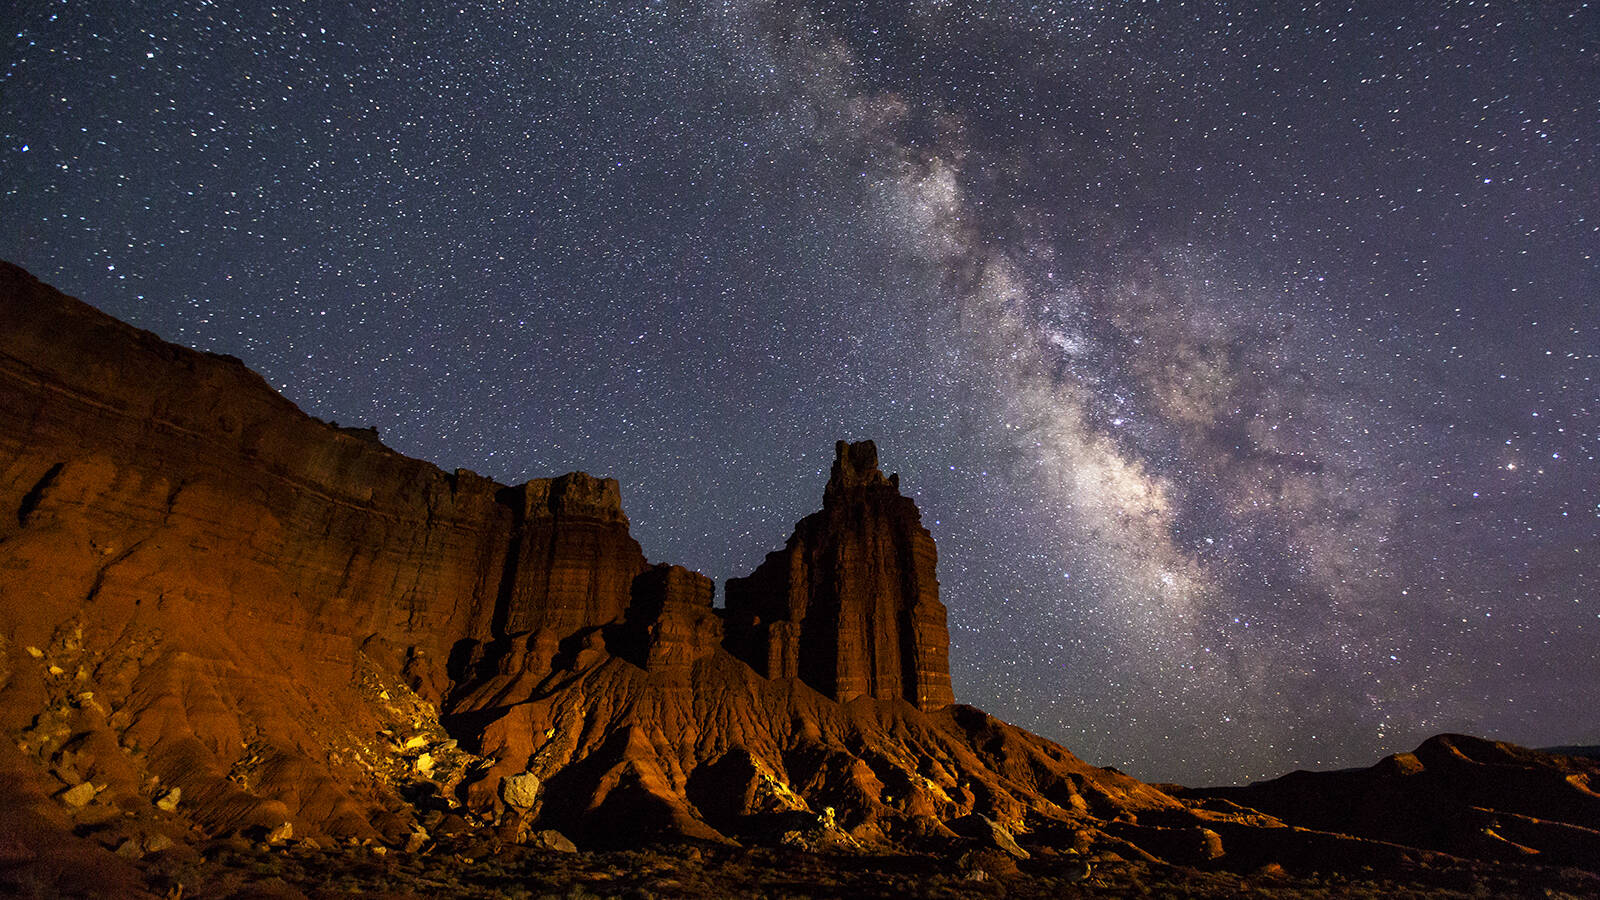 <p>When Frank finally managed to snap this photo at Capitol Reef National Park in Utah after an hour of trying, he and his wife, who was with him, had to laugh at the lucky break he got as he was about to give up: An approaching car’s headlights had illuminated the rock wall at just the right moment. “She was like, ‘Well, you couldn’t have planned that any better,’” he said.</p>